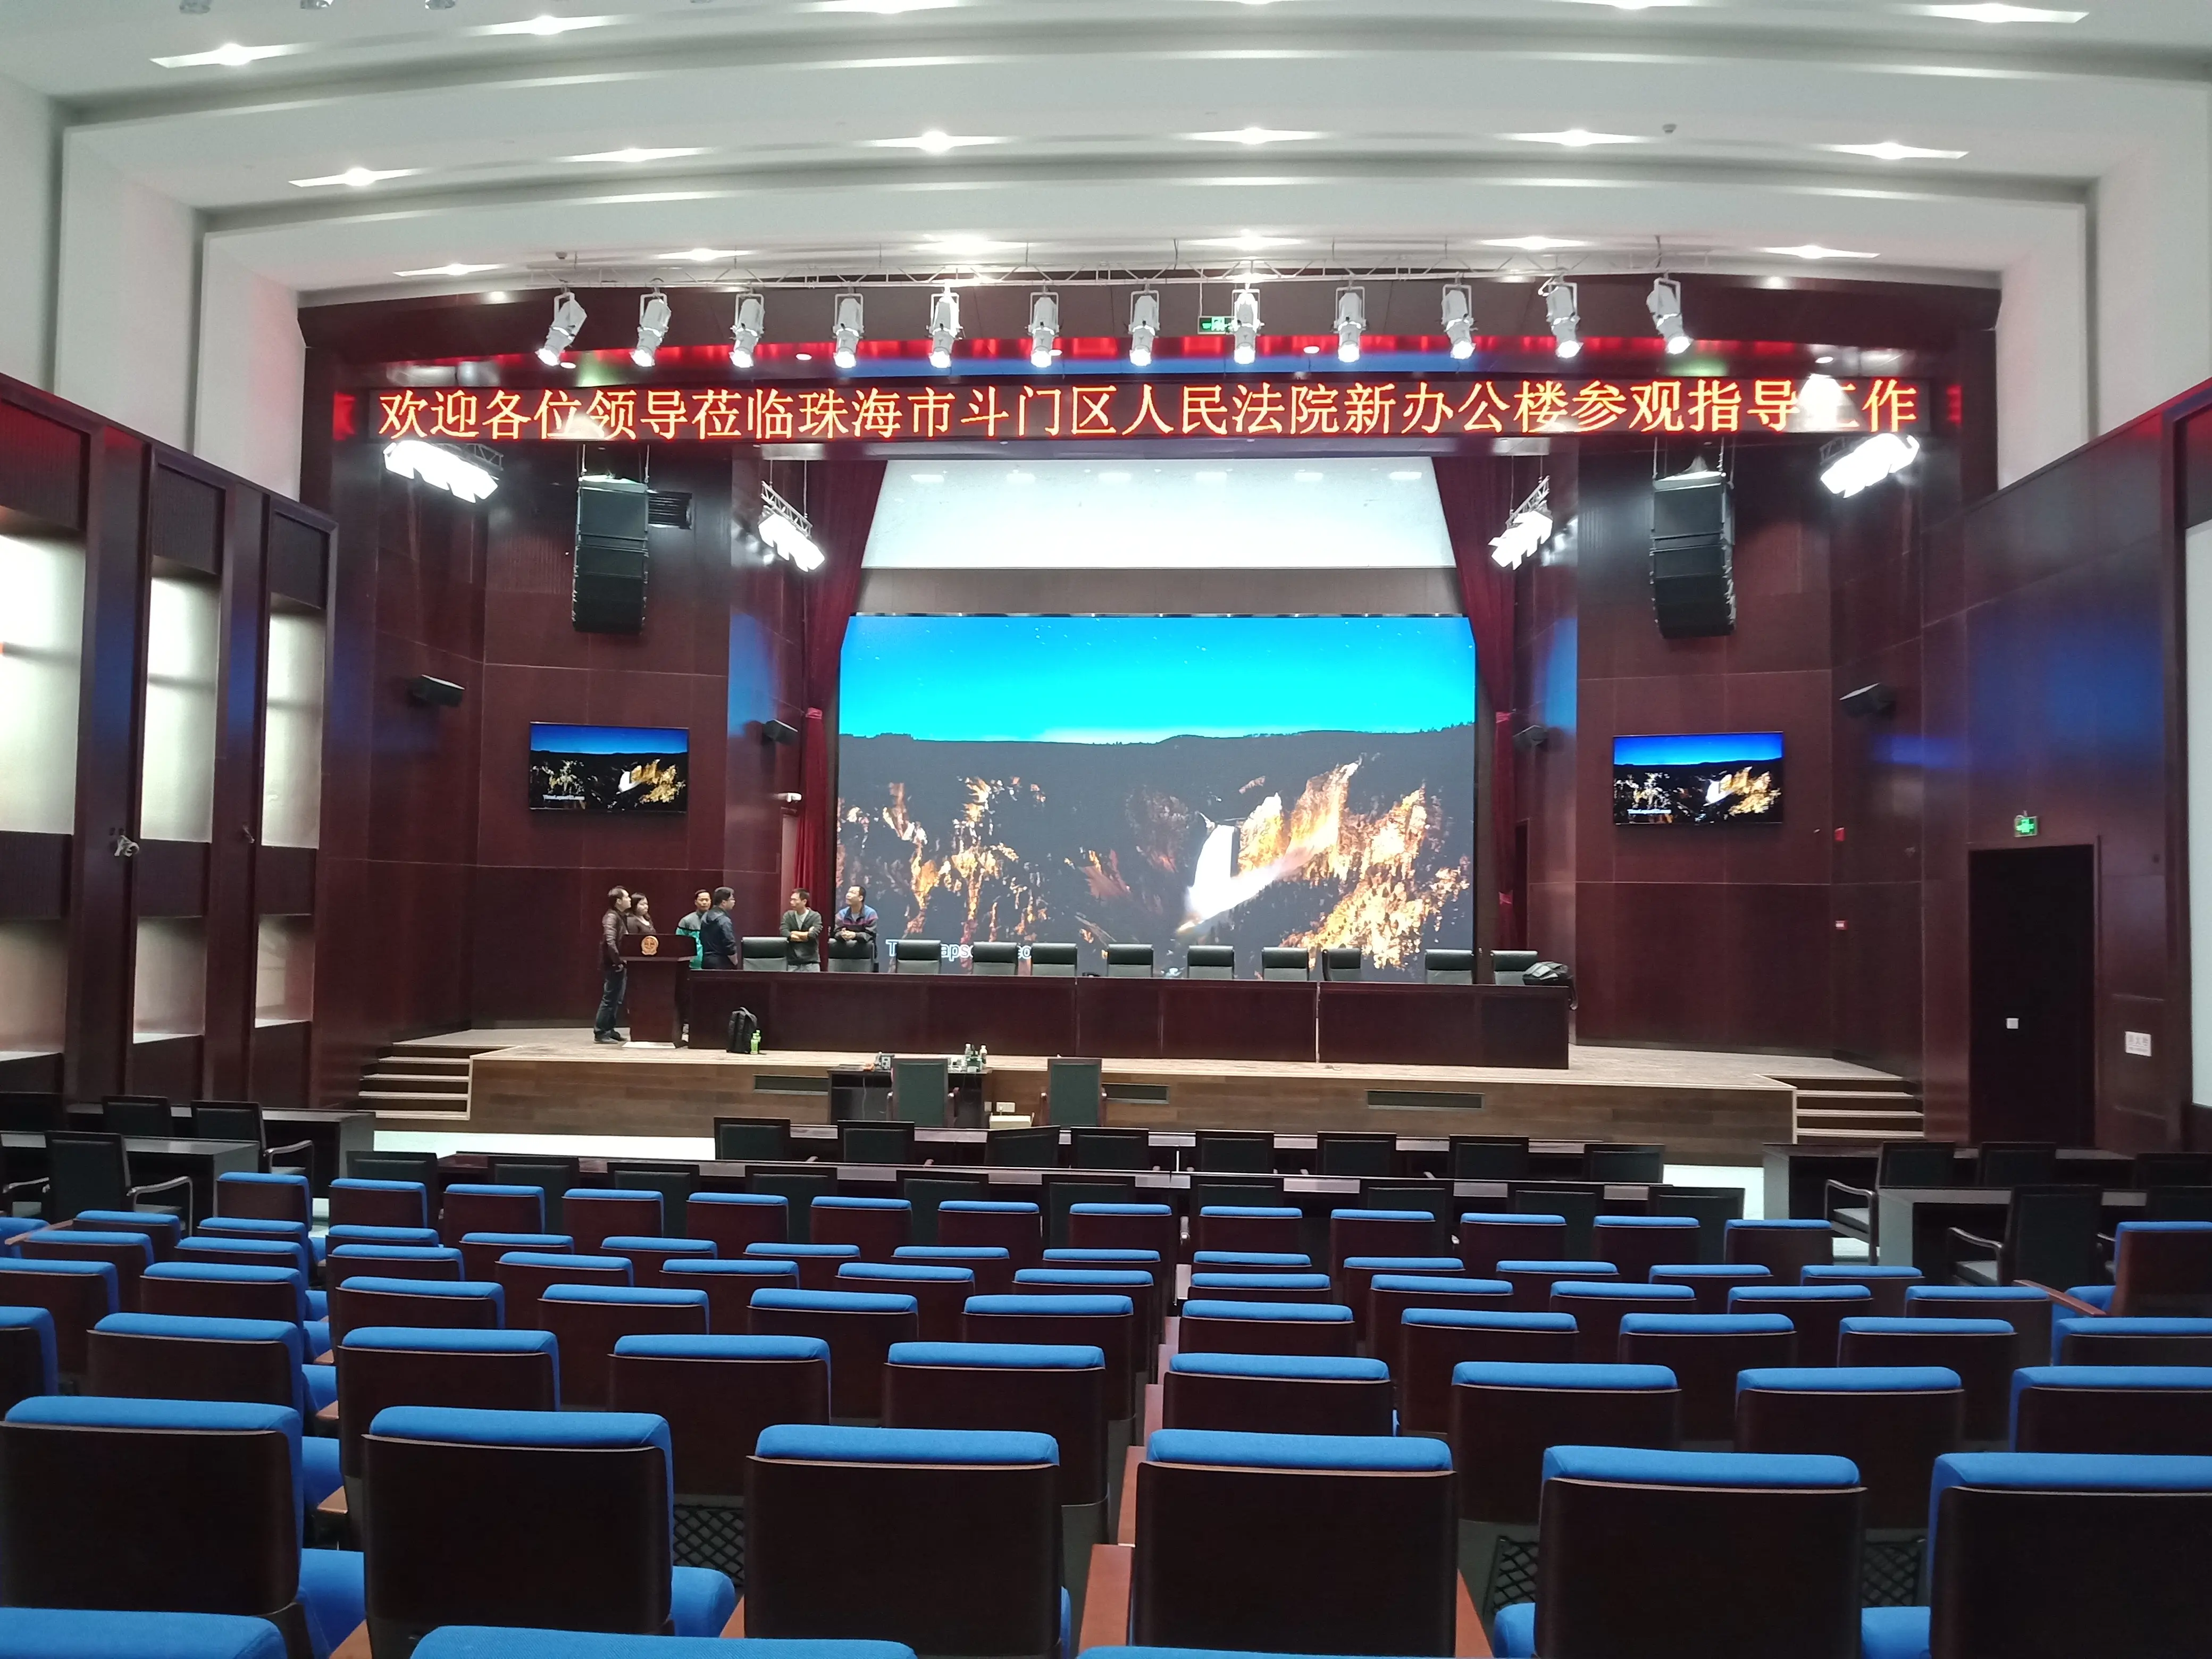 Indoor High Density Ultra Thin Full Front Service P1.25 Led Screen 16:9 Ratio 600*337.5mm LED Video Panel LED Screen HD LED TV